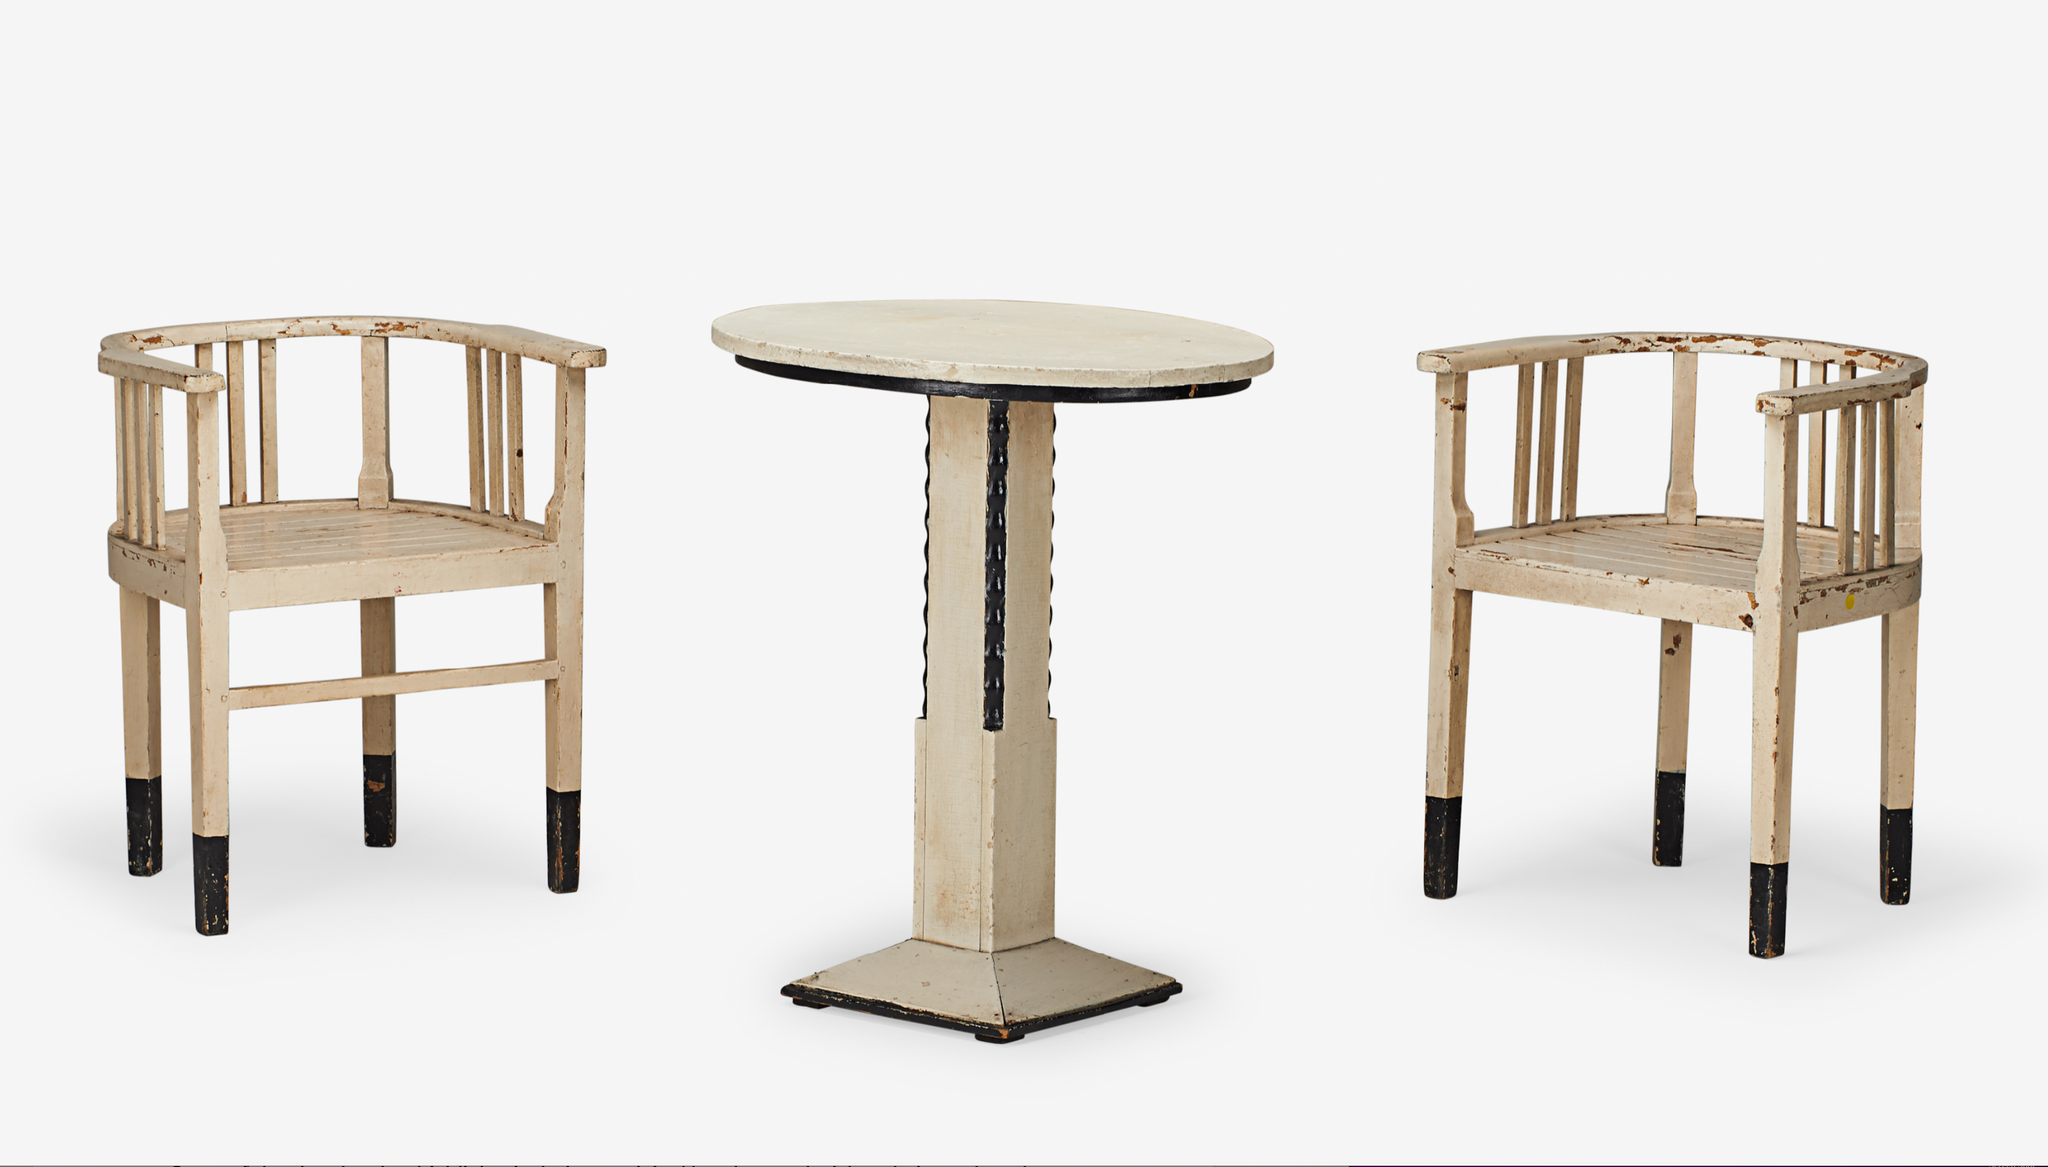 [Andy Warhol] Henry Van De Velde [In the Style of] Table and Chairs from the Andy Warhol Collection, ca. 1900